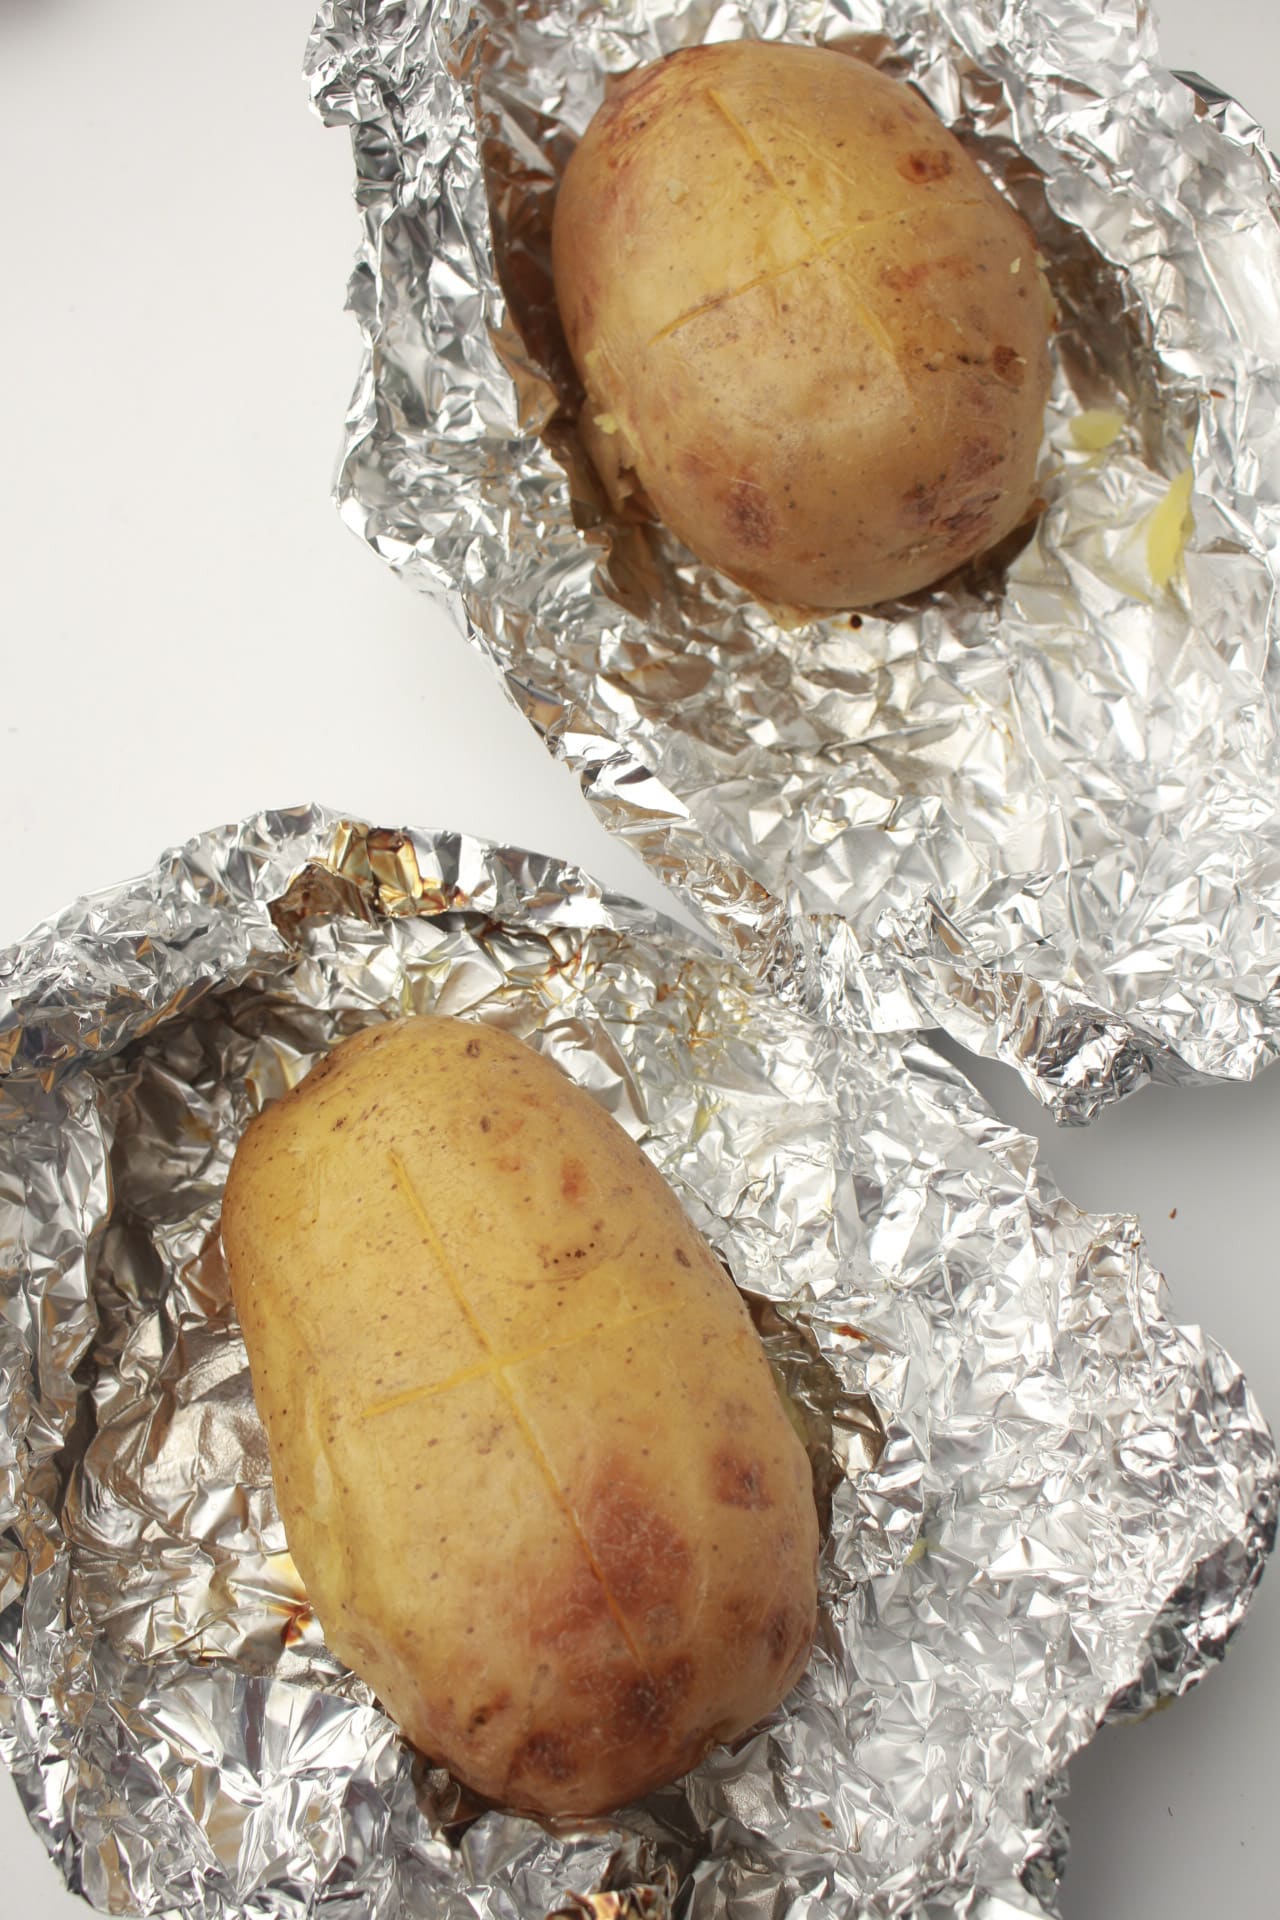 How long to bake potatoes at 375 in foil